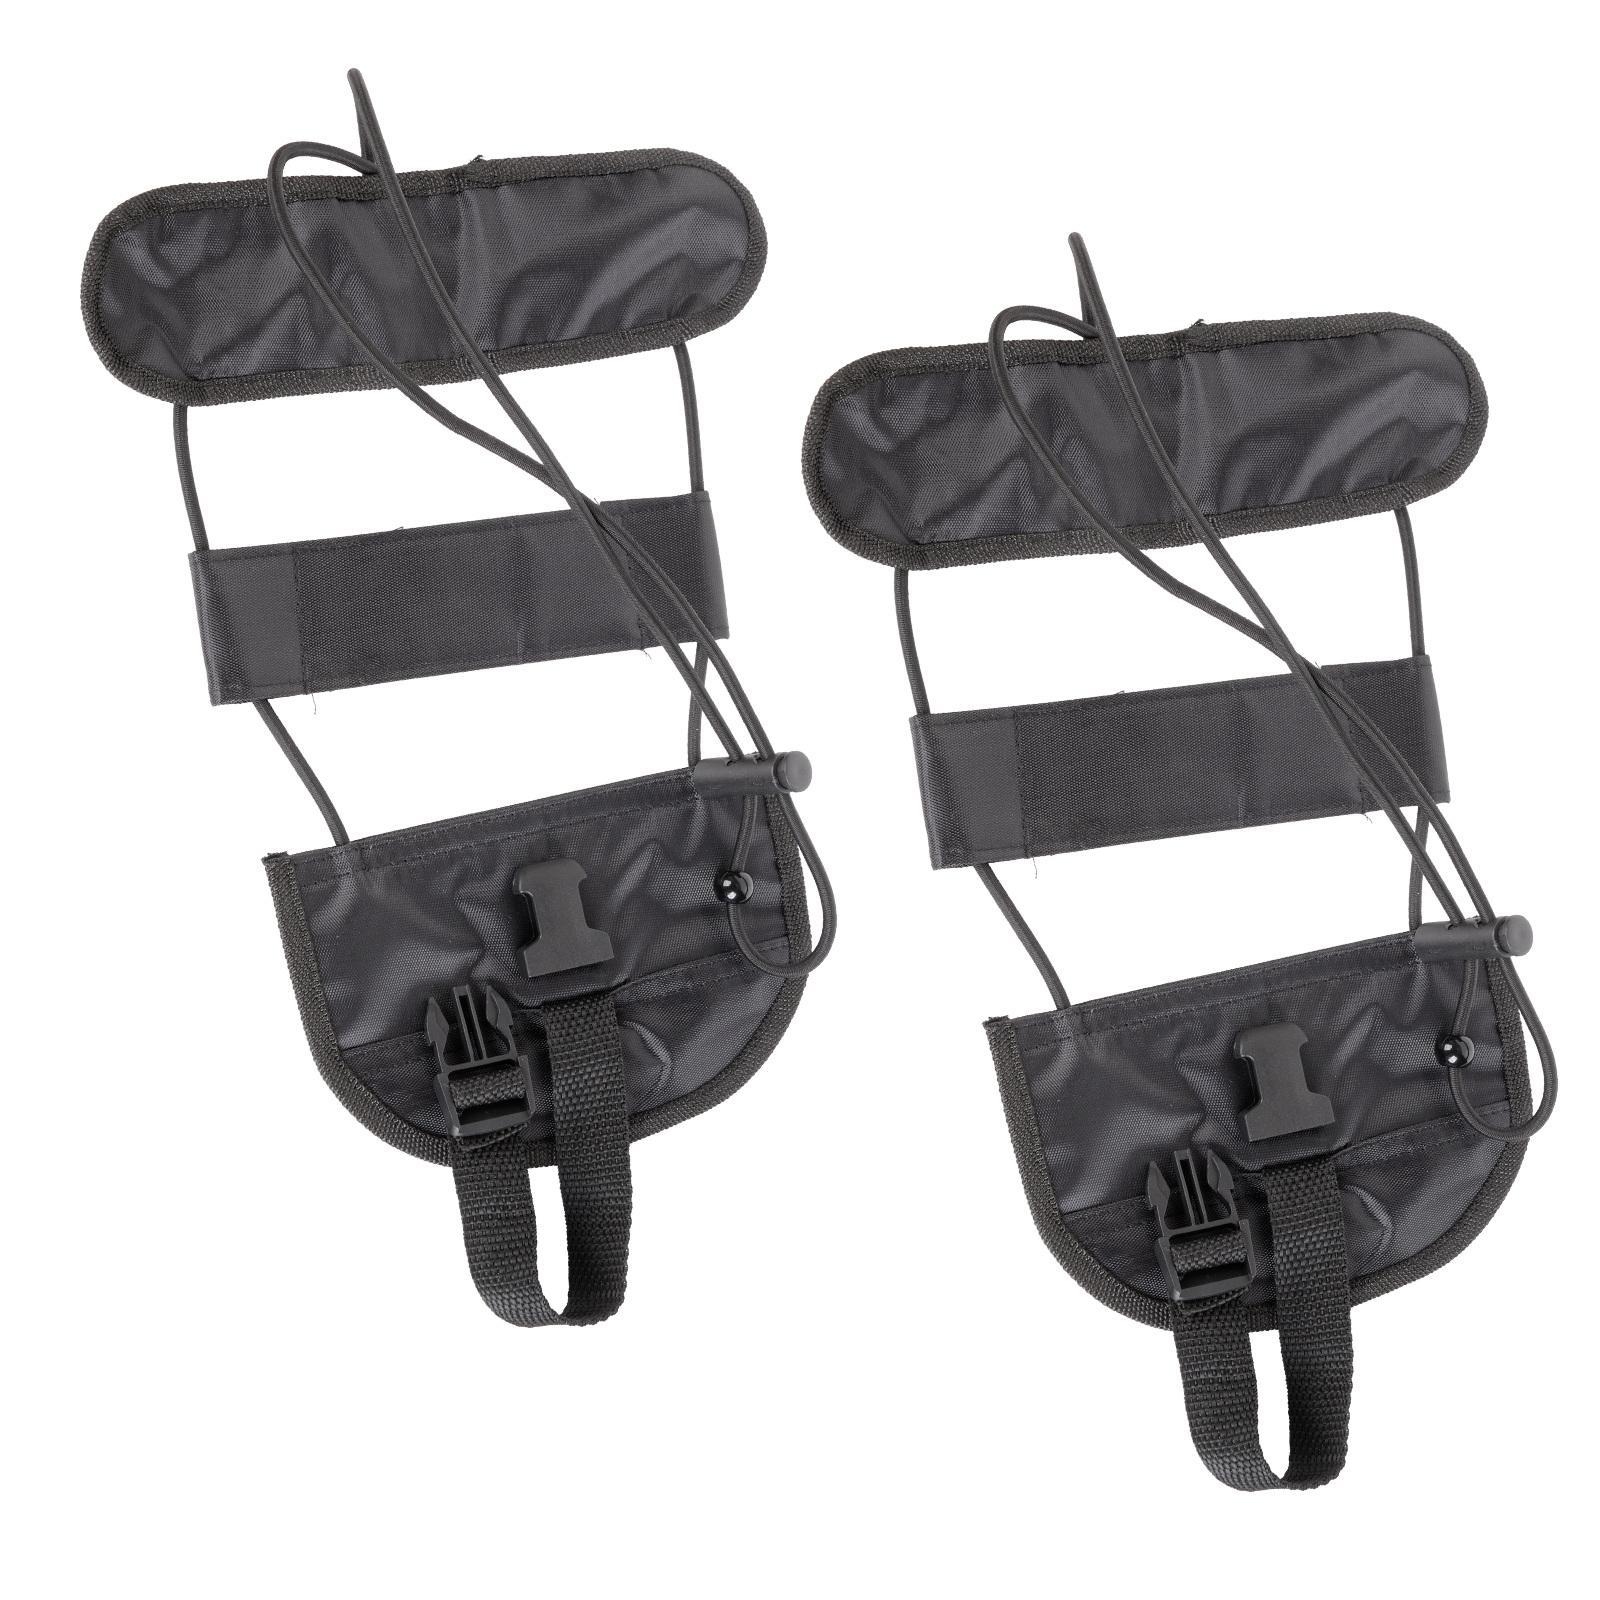 2X Add A Bag Strap Carry On Bungee Travel Luggage Suitcase Adjustable Tape Belt